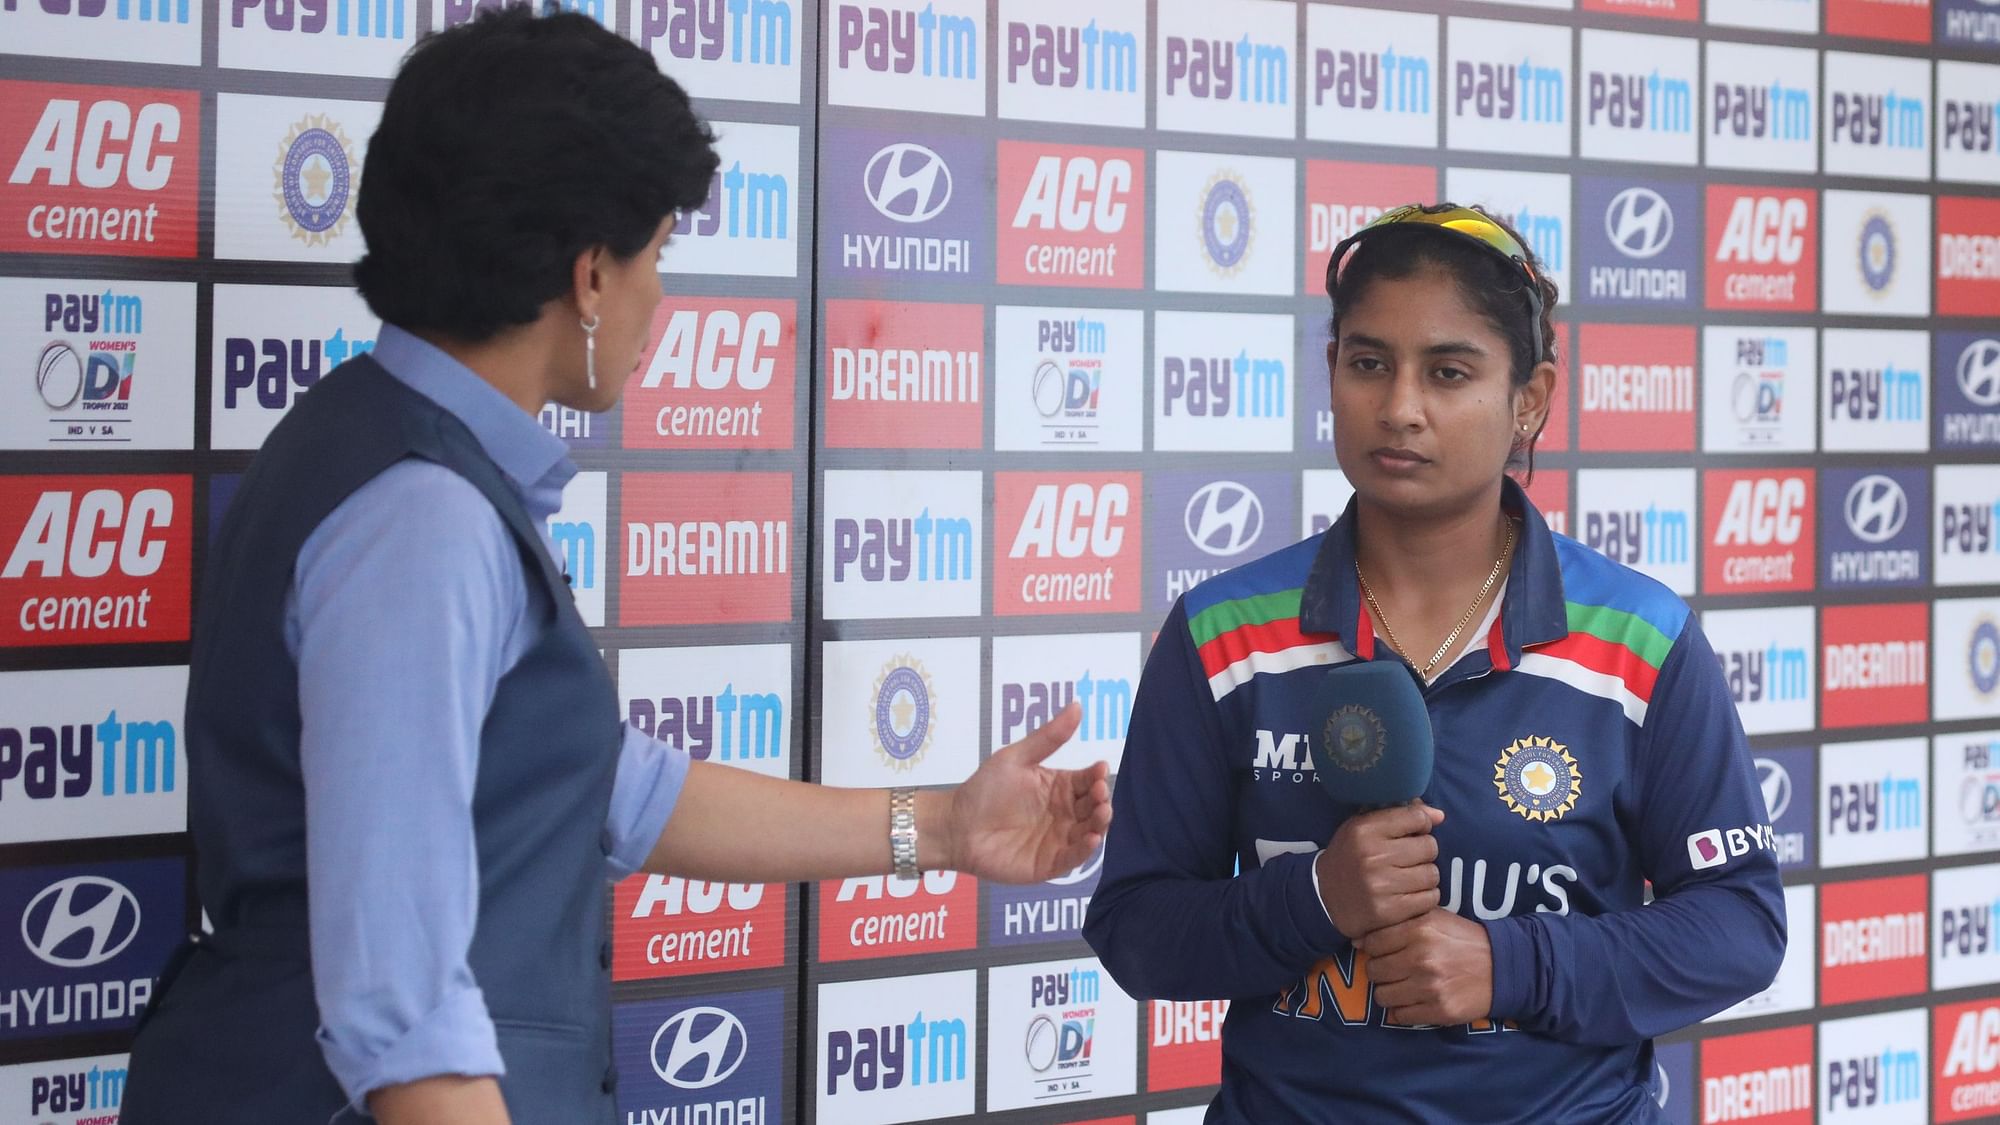 Indian women’s ODI captain Mithali Raj spoke to the media after India lost the third ODI to South Africa on Friday.